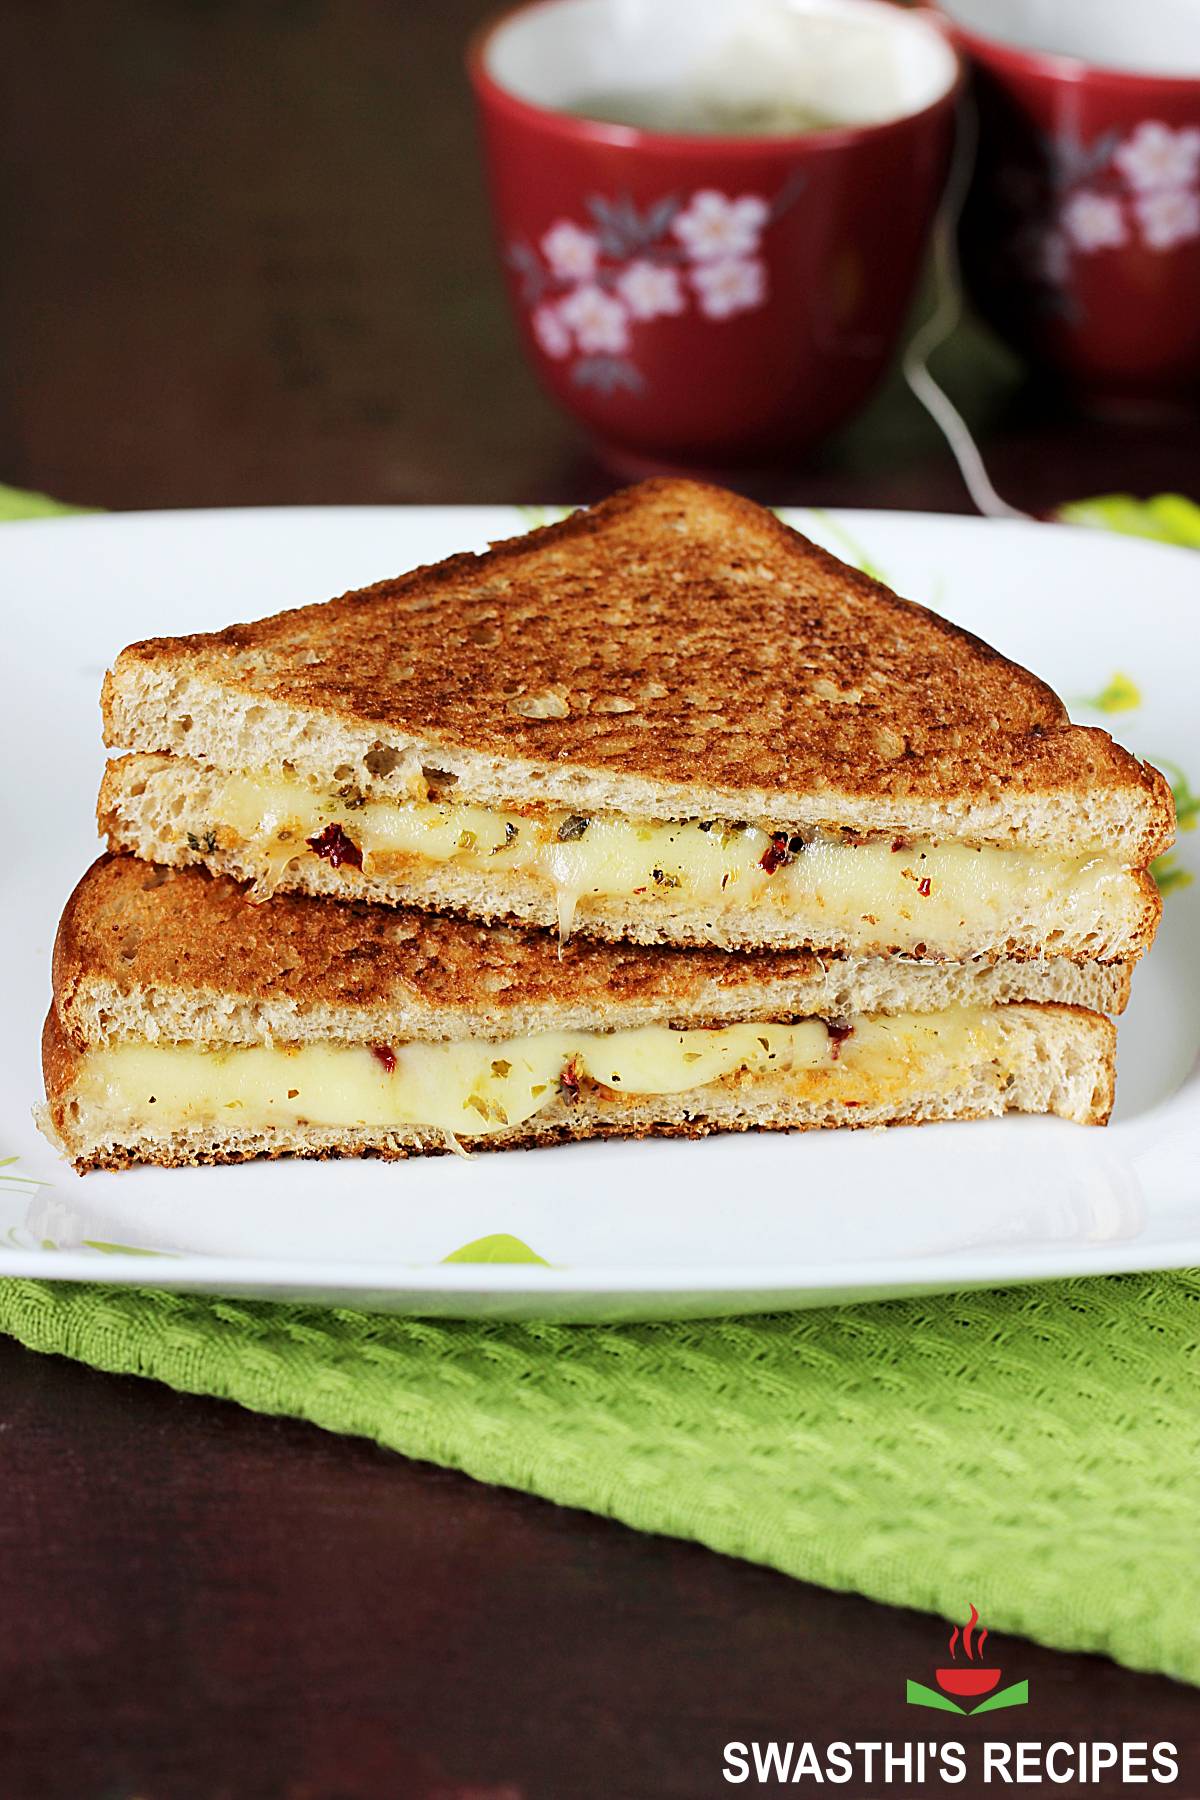 File:Grilled cheese sandwich prepared in toaster oven.jpg